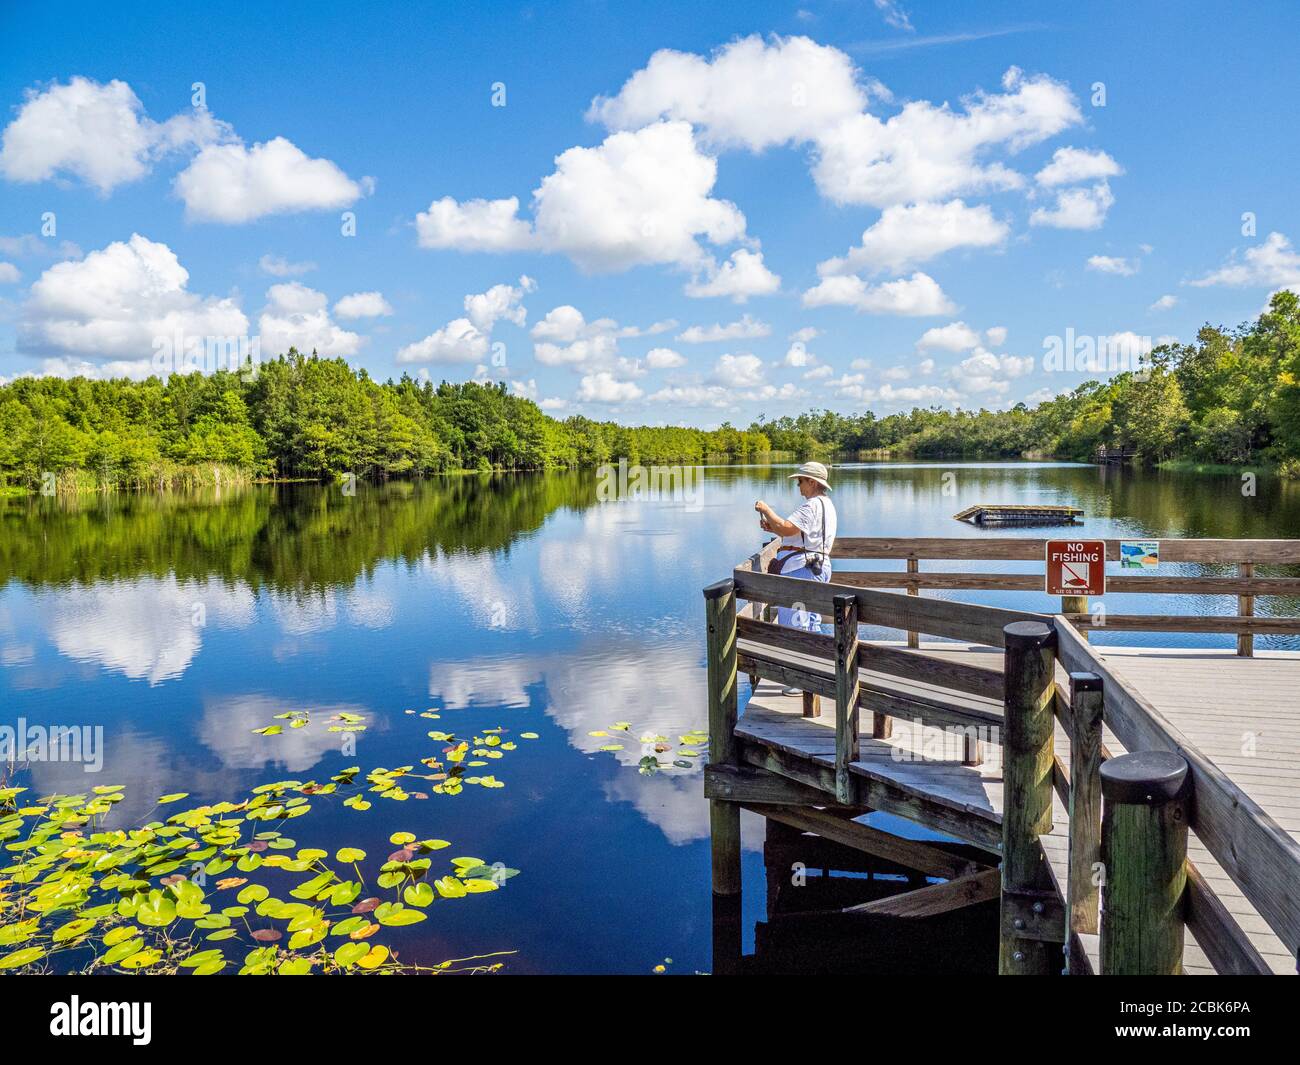 Woman taking picture with phone on summer day in Six Mile Cypress Slough Preserve in Fort Myers Florida in the United States Stock Photo